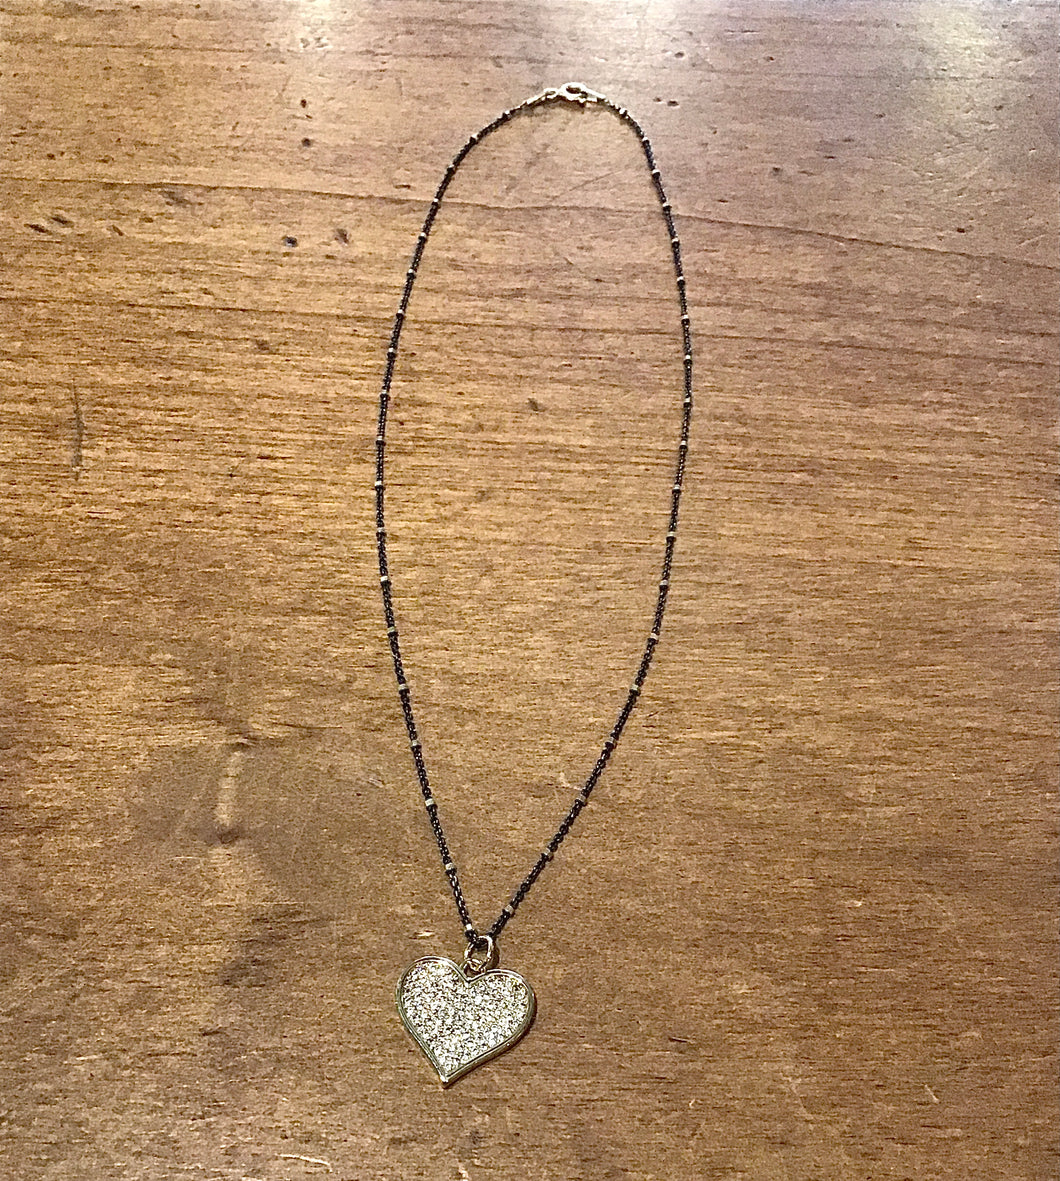 Phat Heart Necklace by Sonya Renee Jewelry